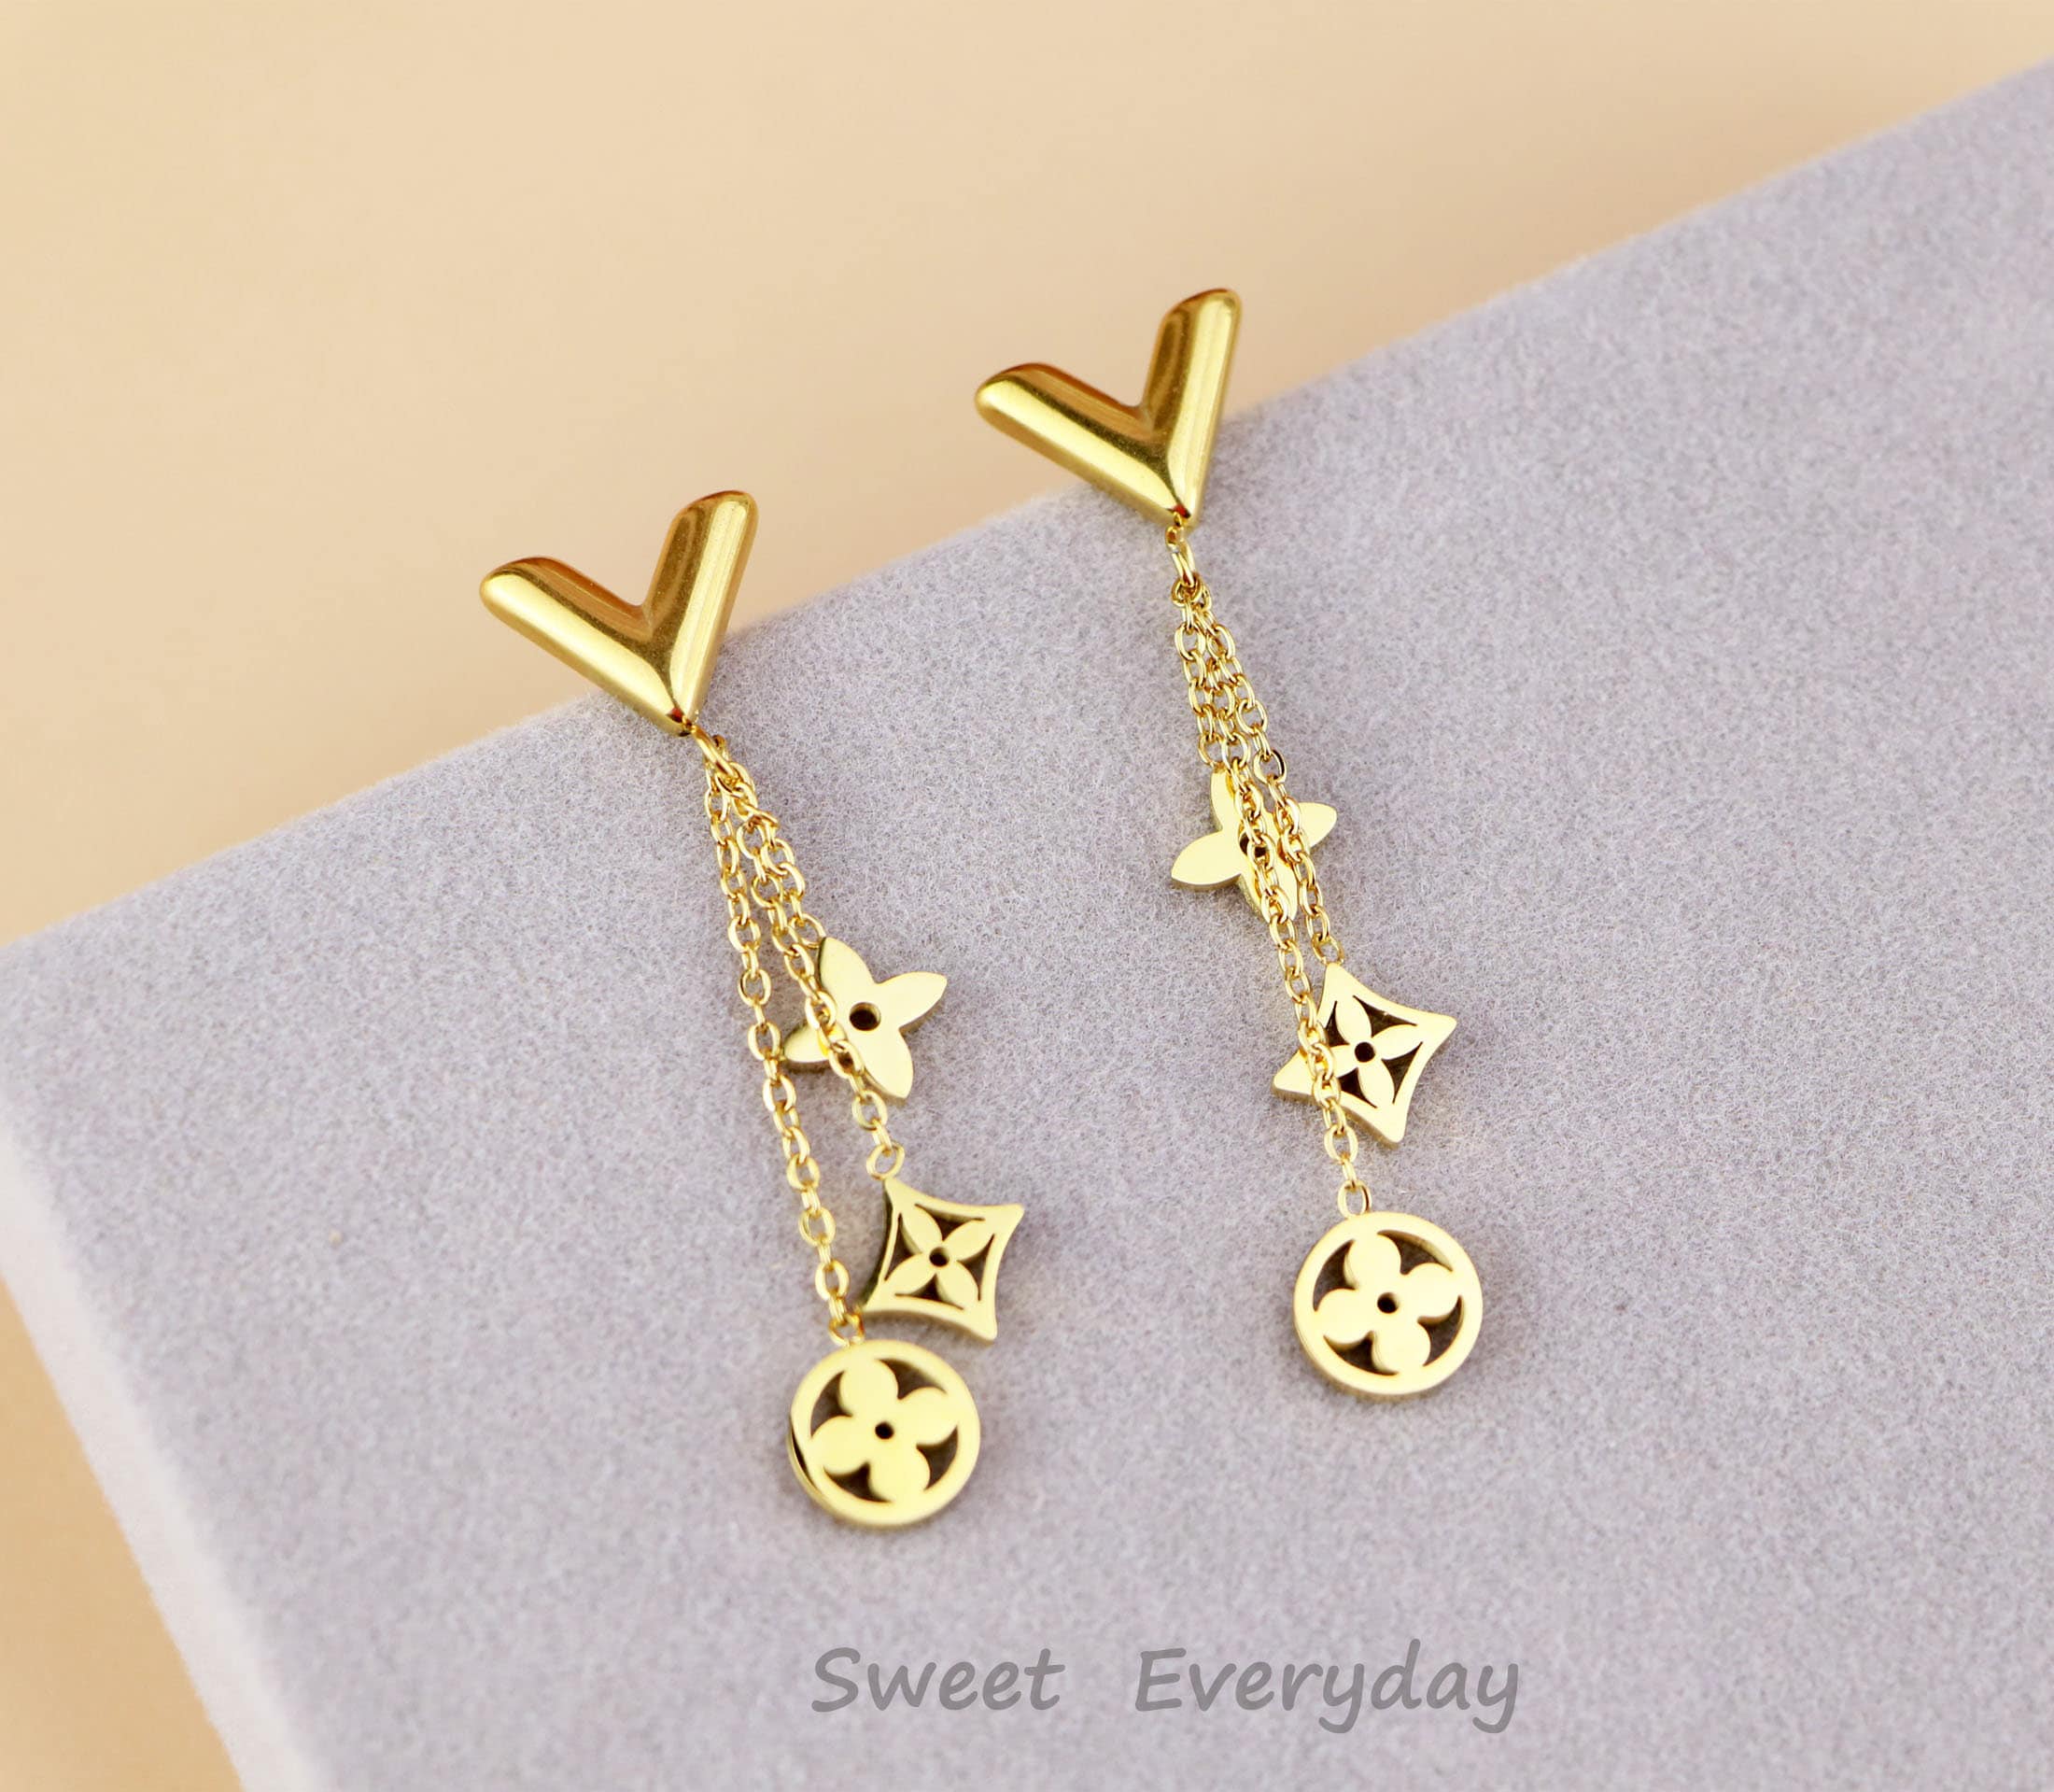 SweetEveryday 18K Gold Waterproof Clover Earrings and Necklace Set,Gold Lucky Four Leaf Clover Earrings and Bracelet,Tarnish Free Clover Jewelry Set